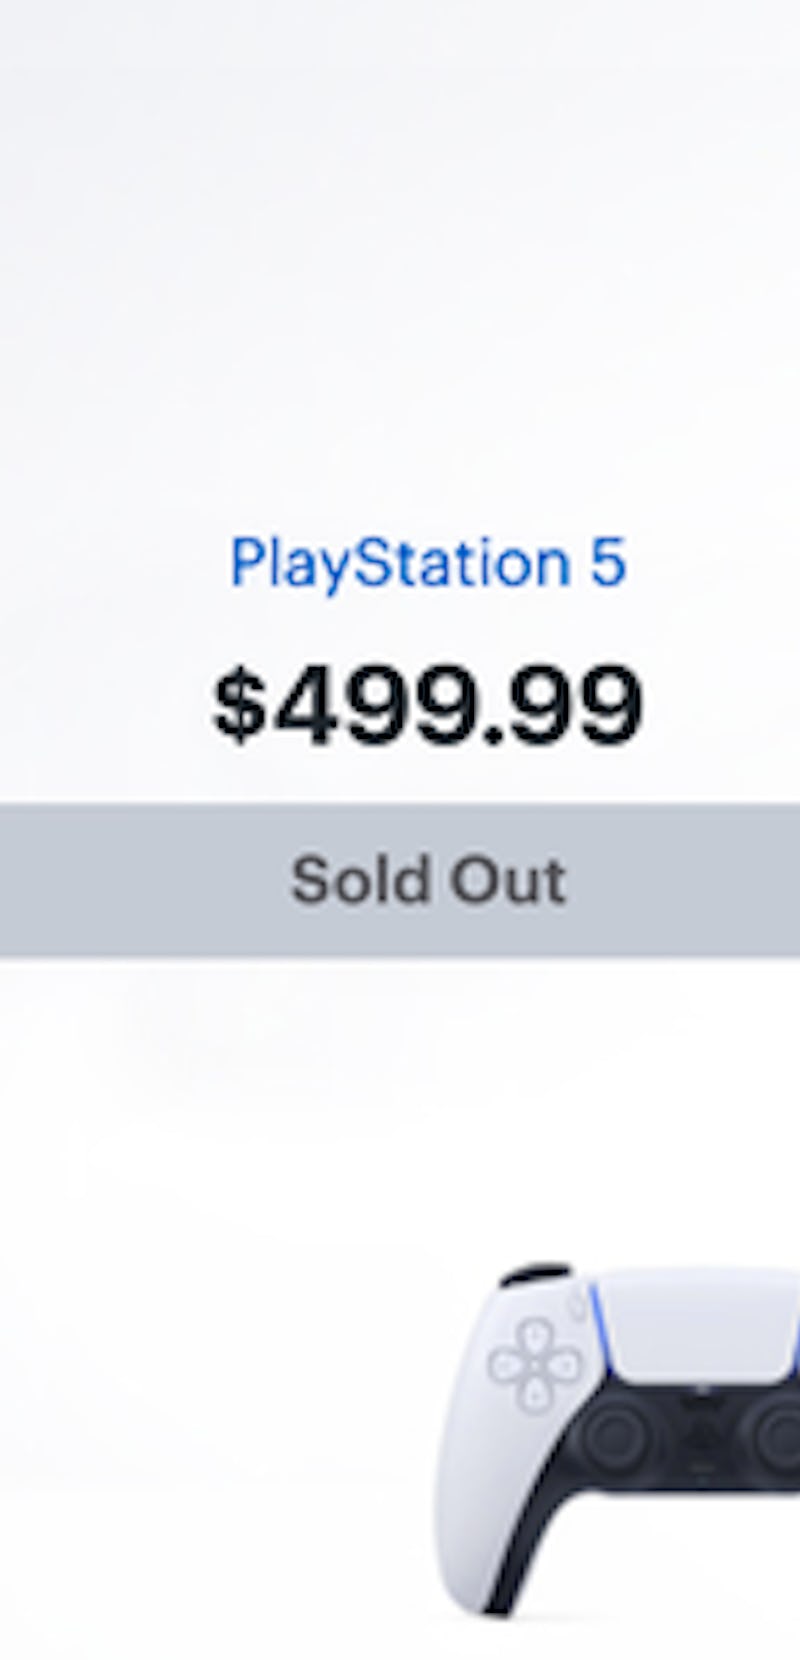 PlayStation 5 Sold Out Image